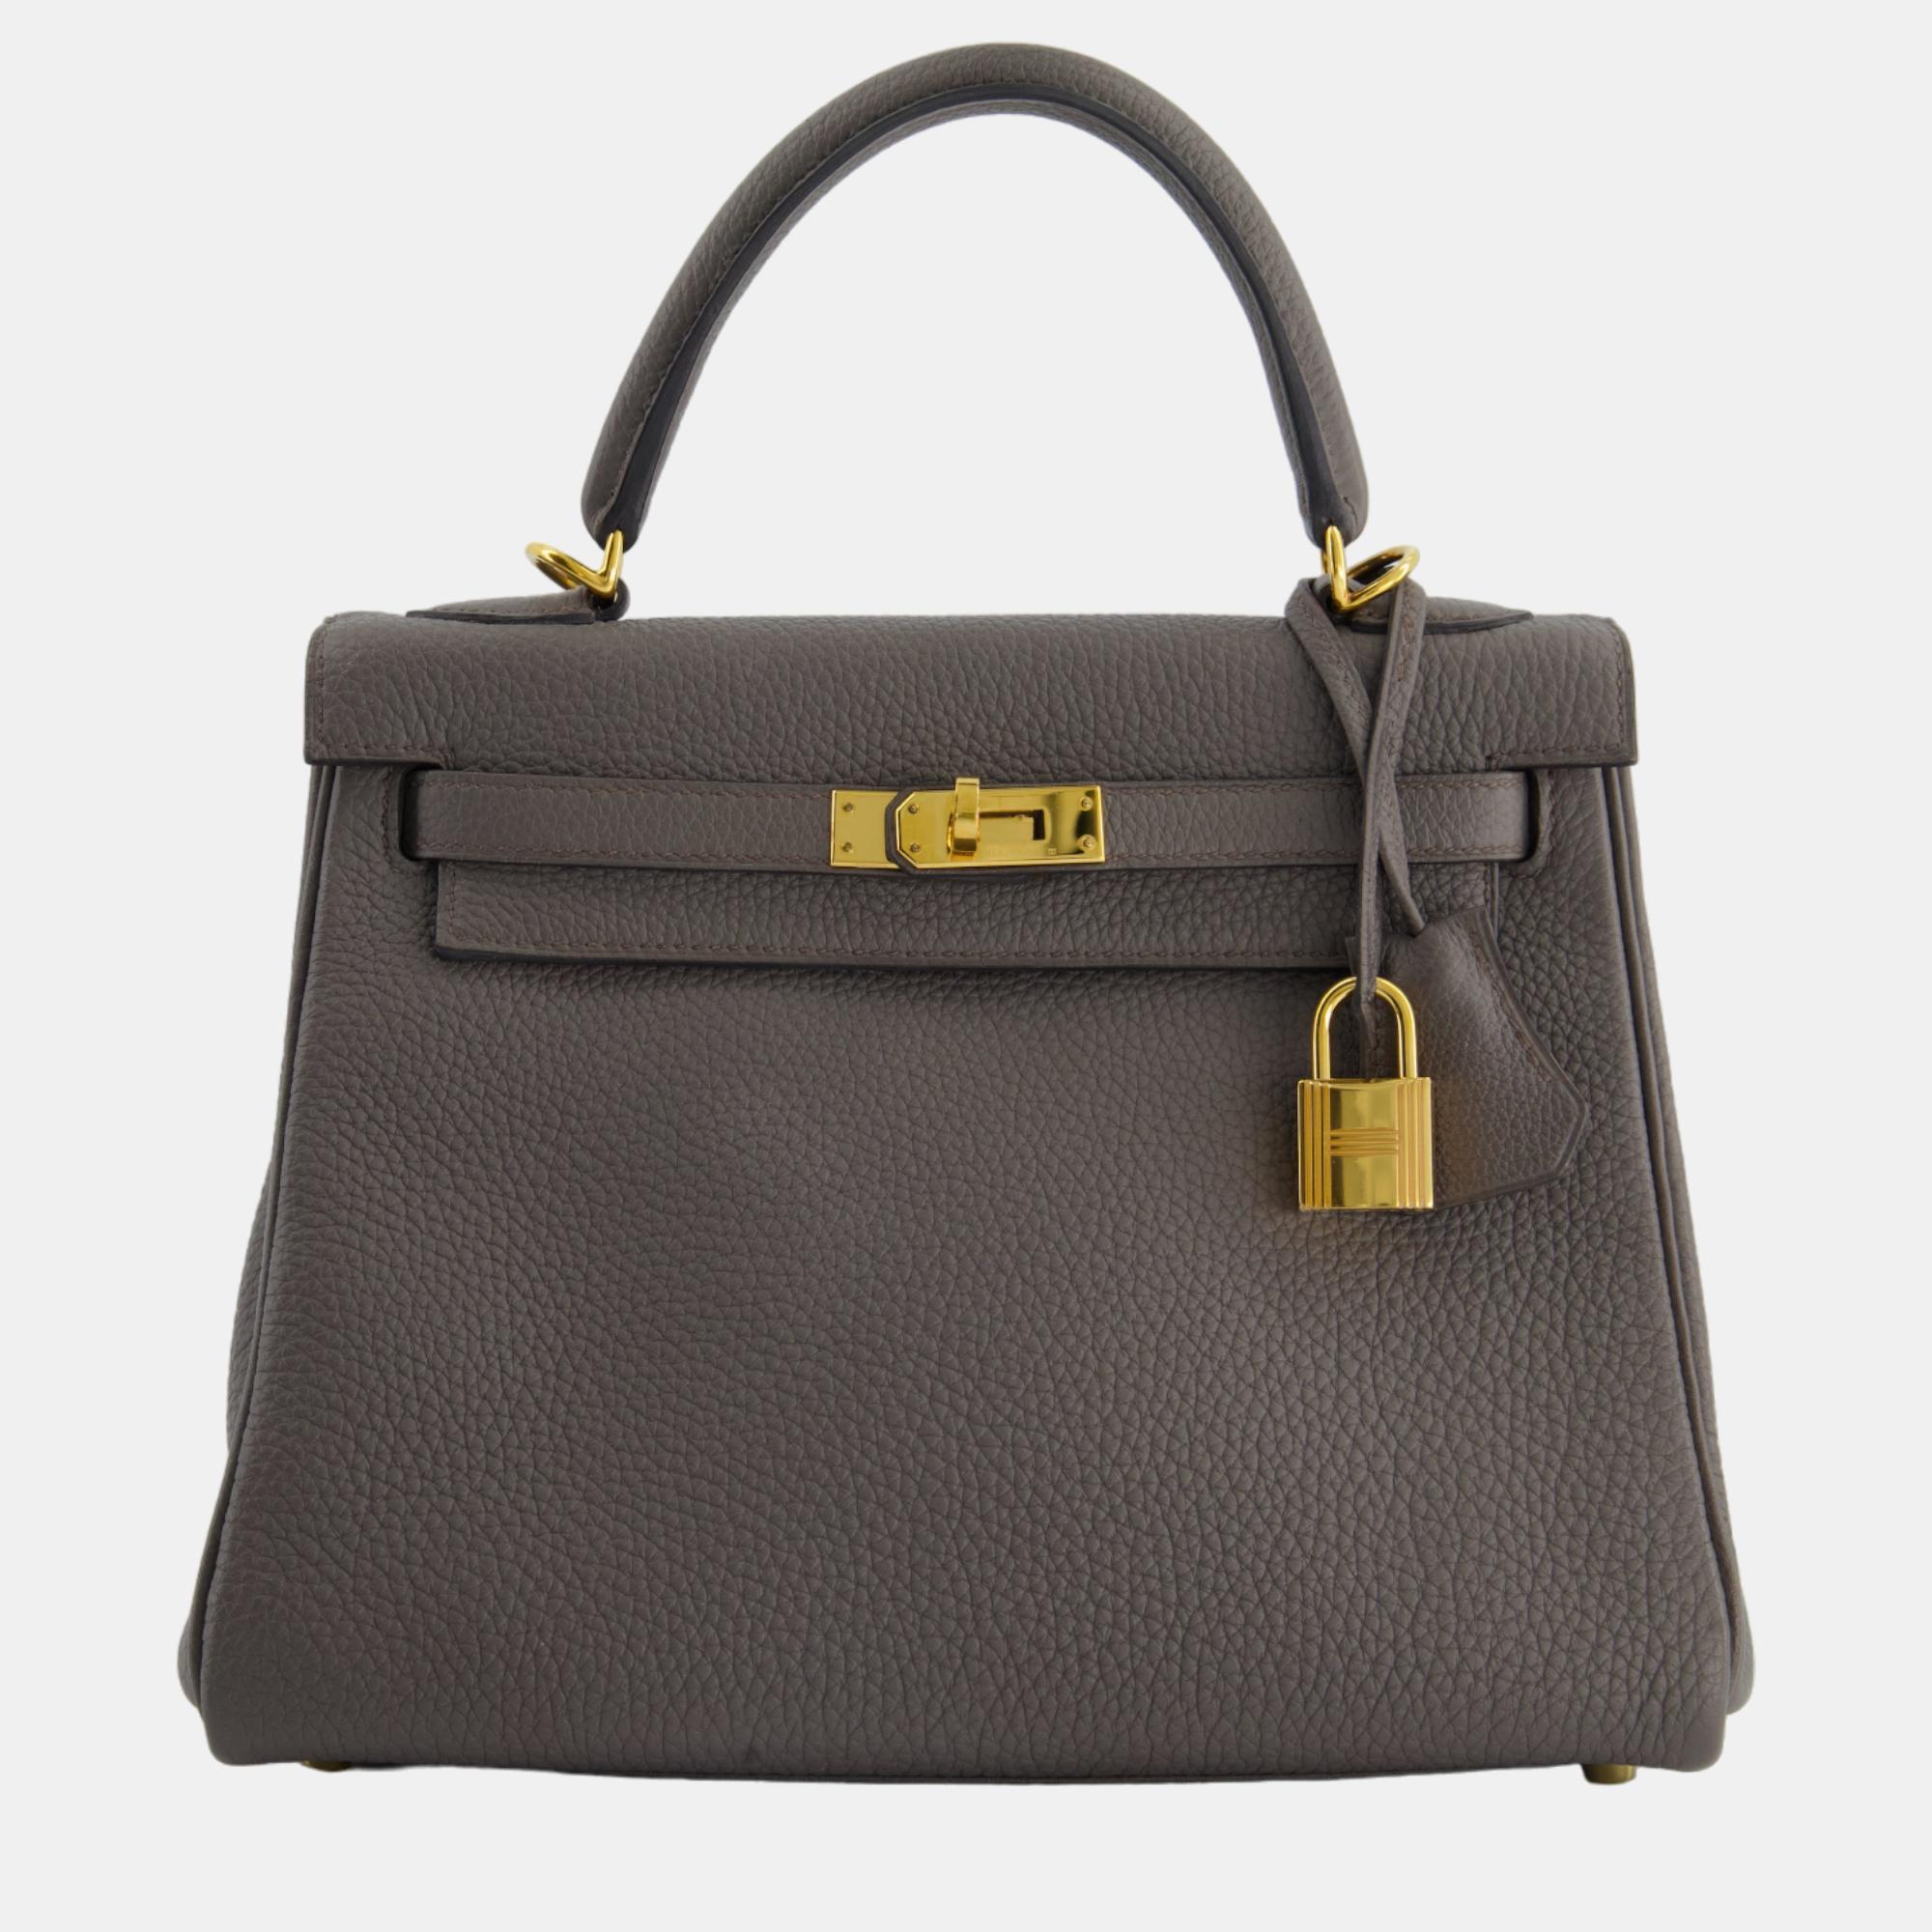 Hermes kelly retourne bag 25cm in gris etain togo leather with gold hardware